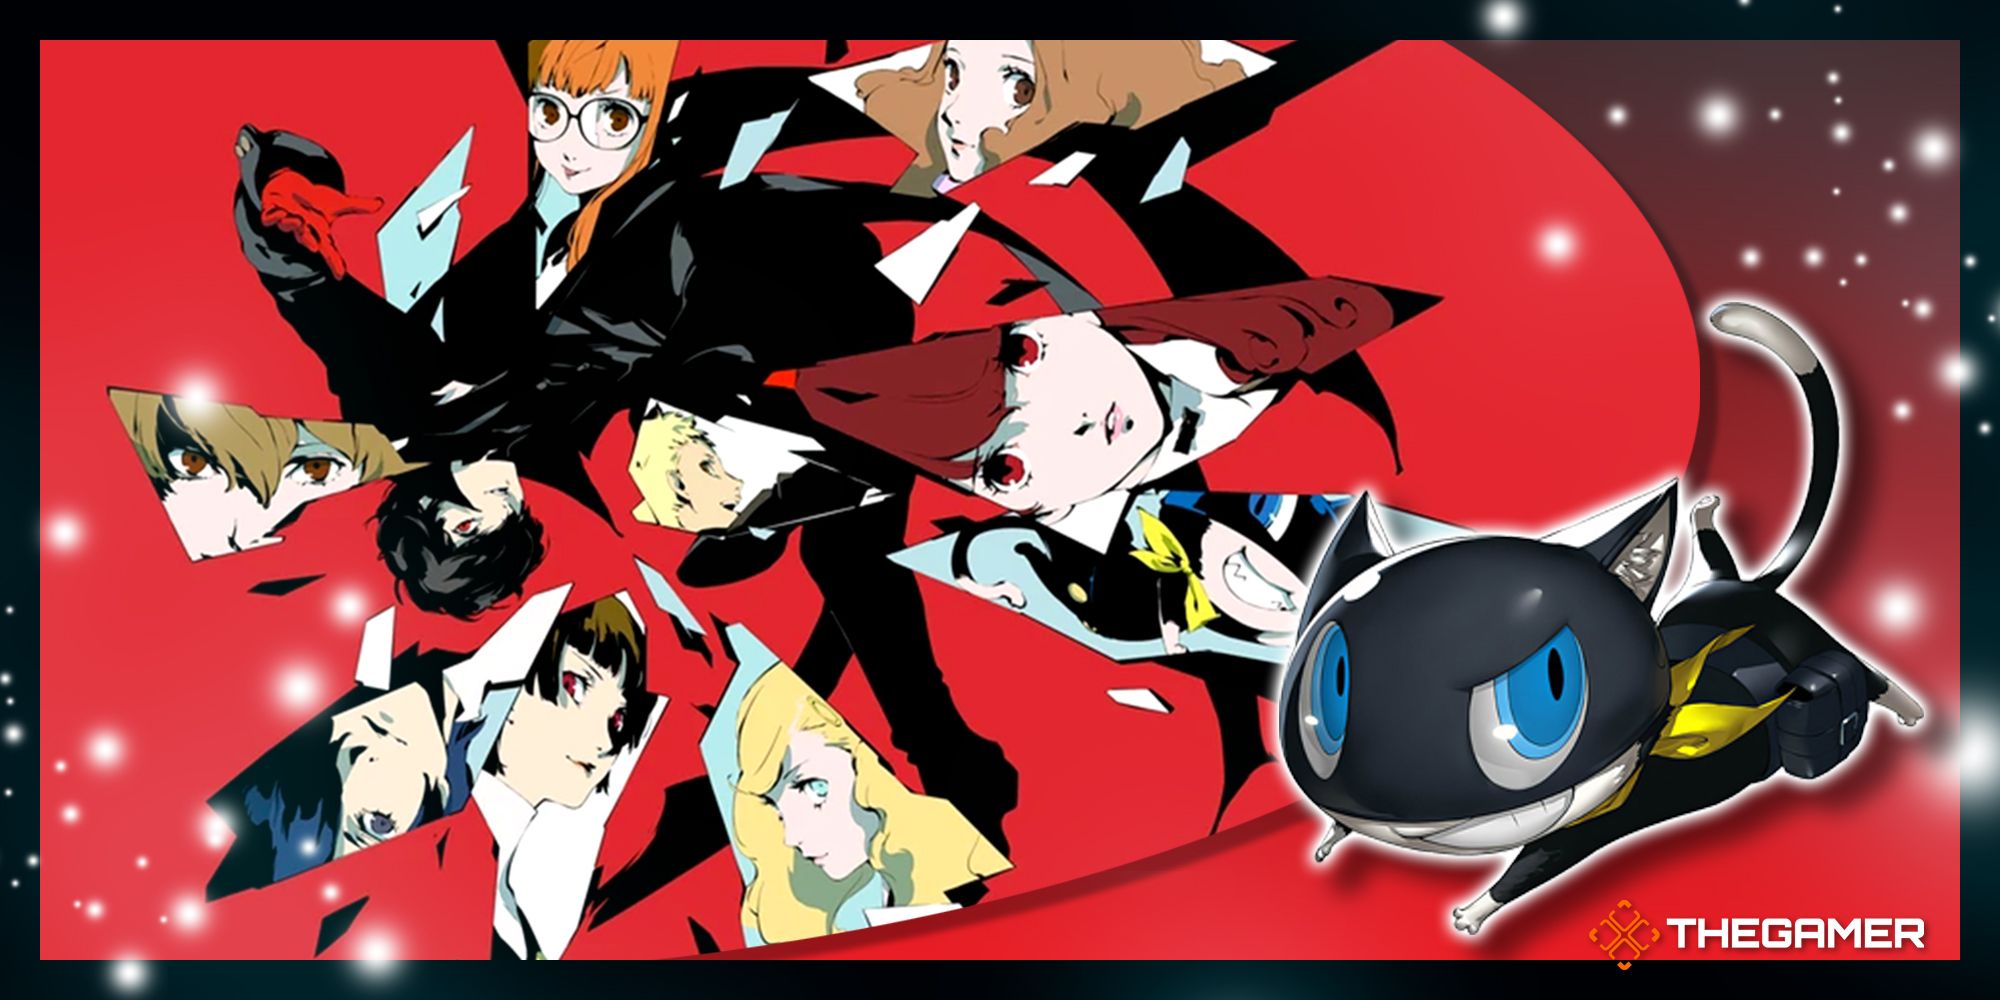 Persona 5: The Royal Official Complete Guide